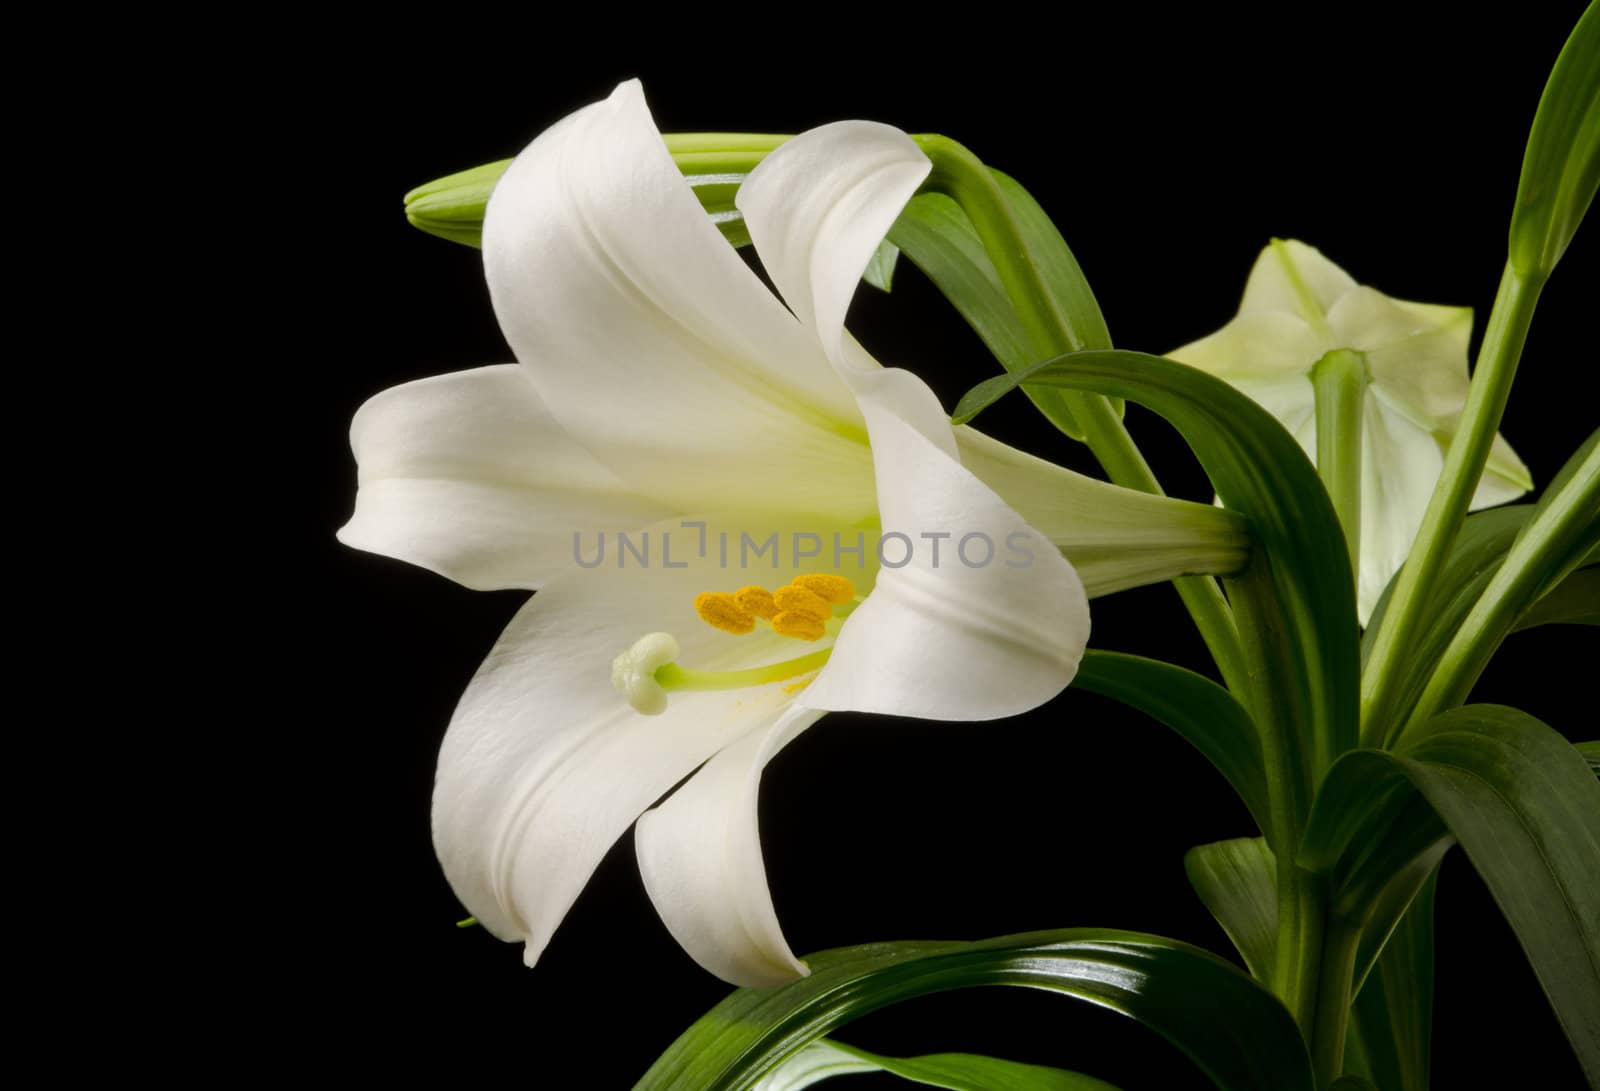 Easter lily with a large blossom on a black background